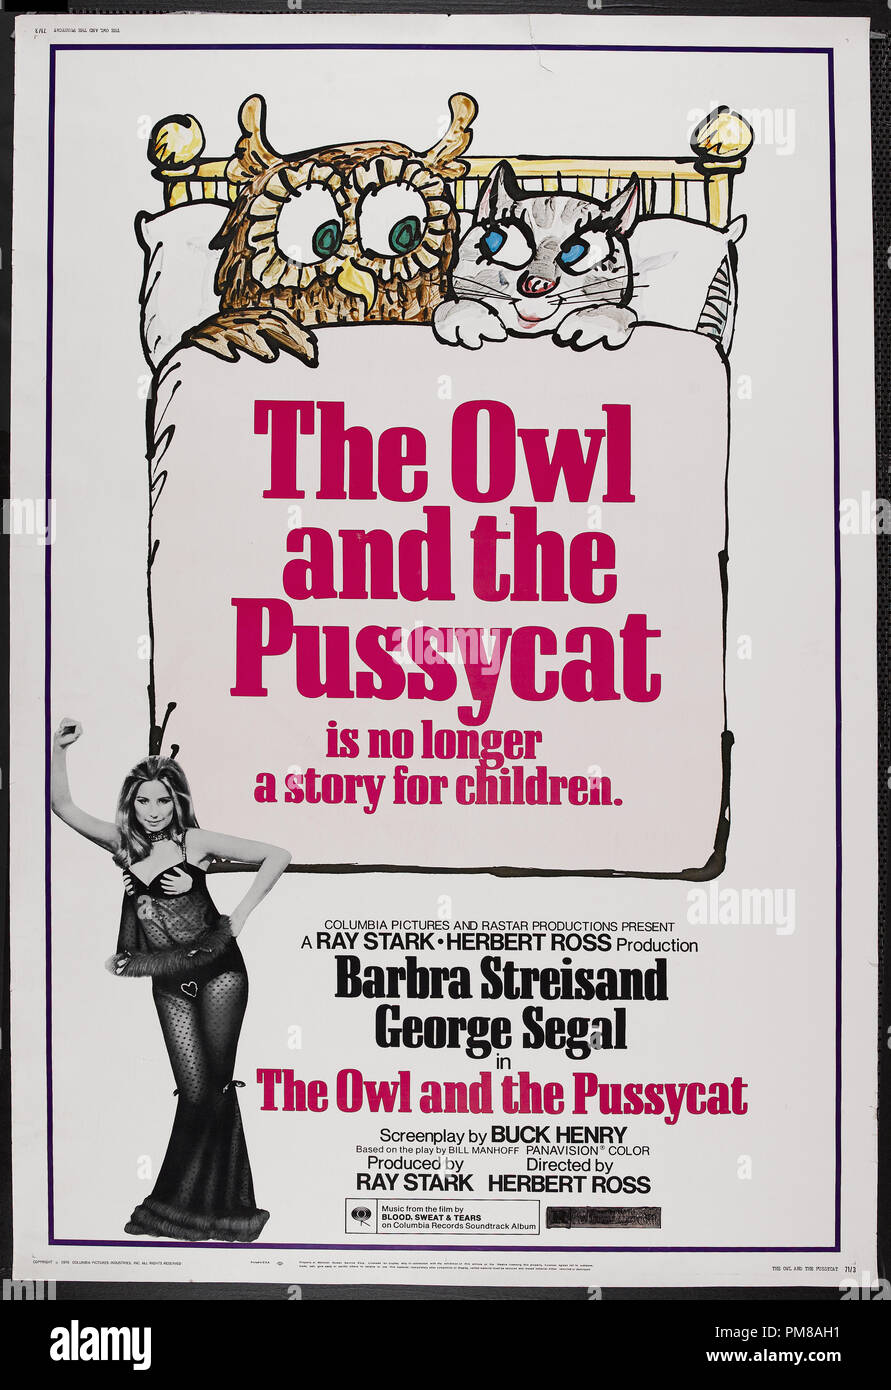 Studio Publicity: "The Owl and the Pussycat" 1970 Columbia  Poster  Barbra Streisand, George Segal   File Reference # 31780_758 Stock Photo